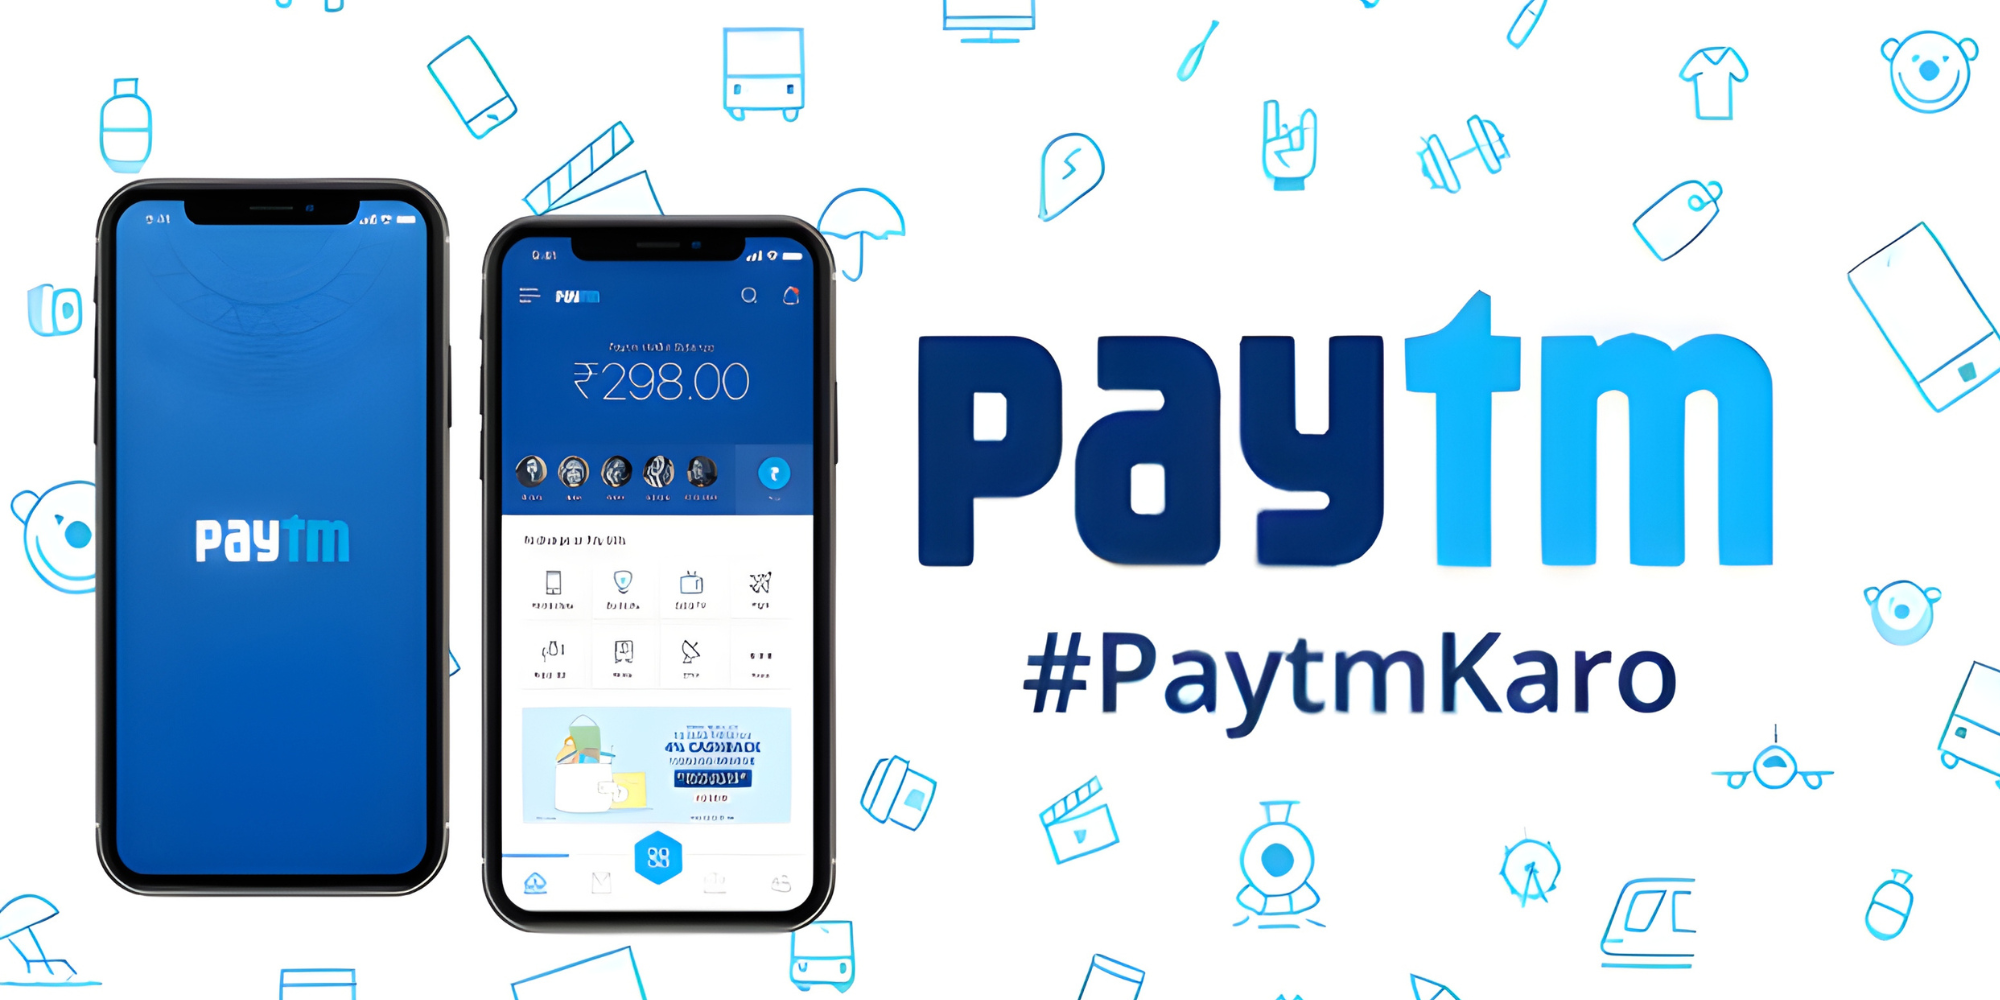 Paytm to hive off wallet business: Report
